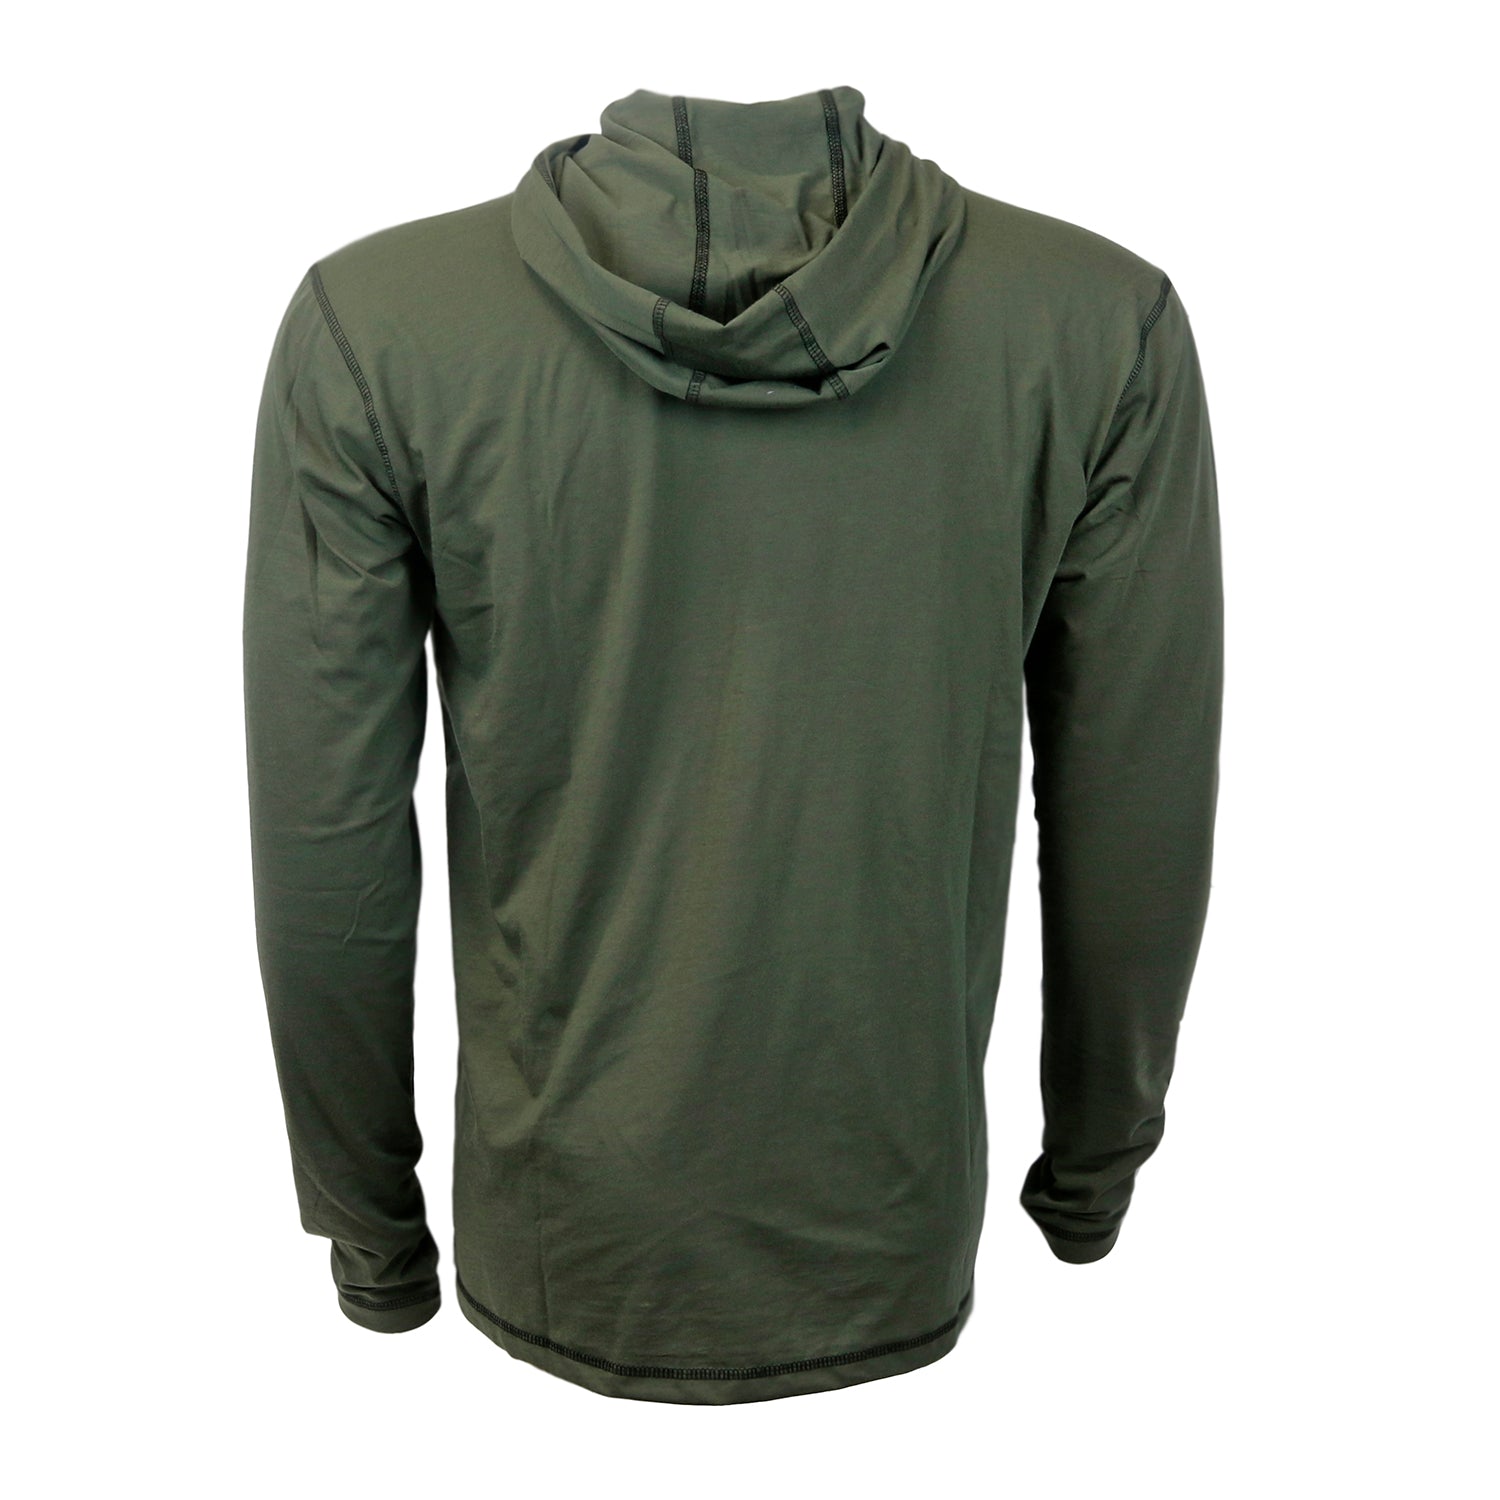 Back view Front view of a dark natural green, long sleeved shirt with hood.